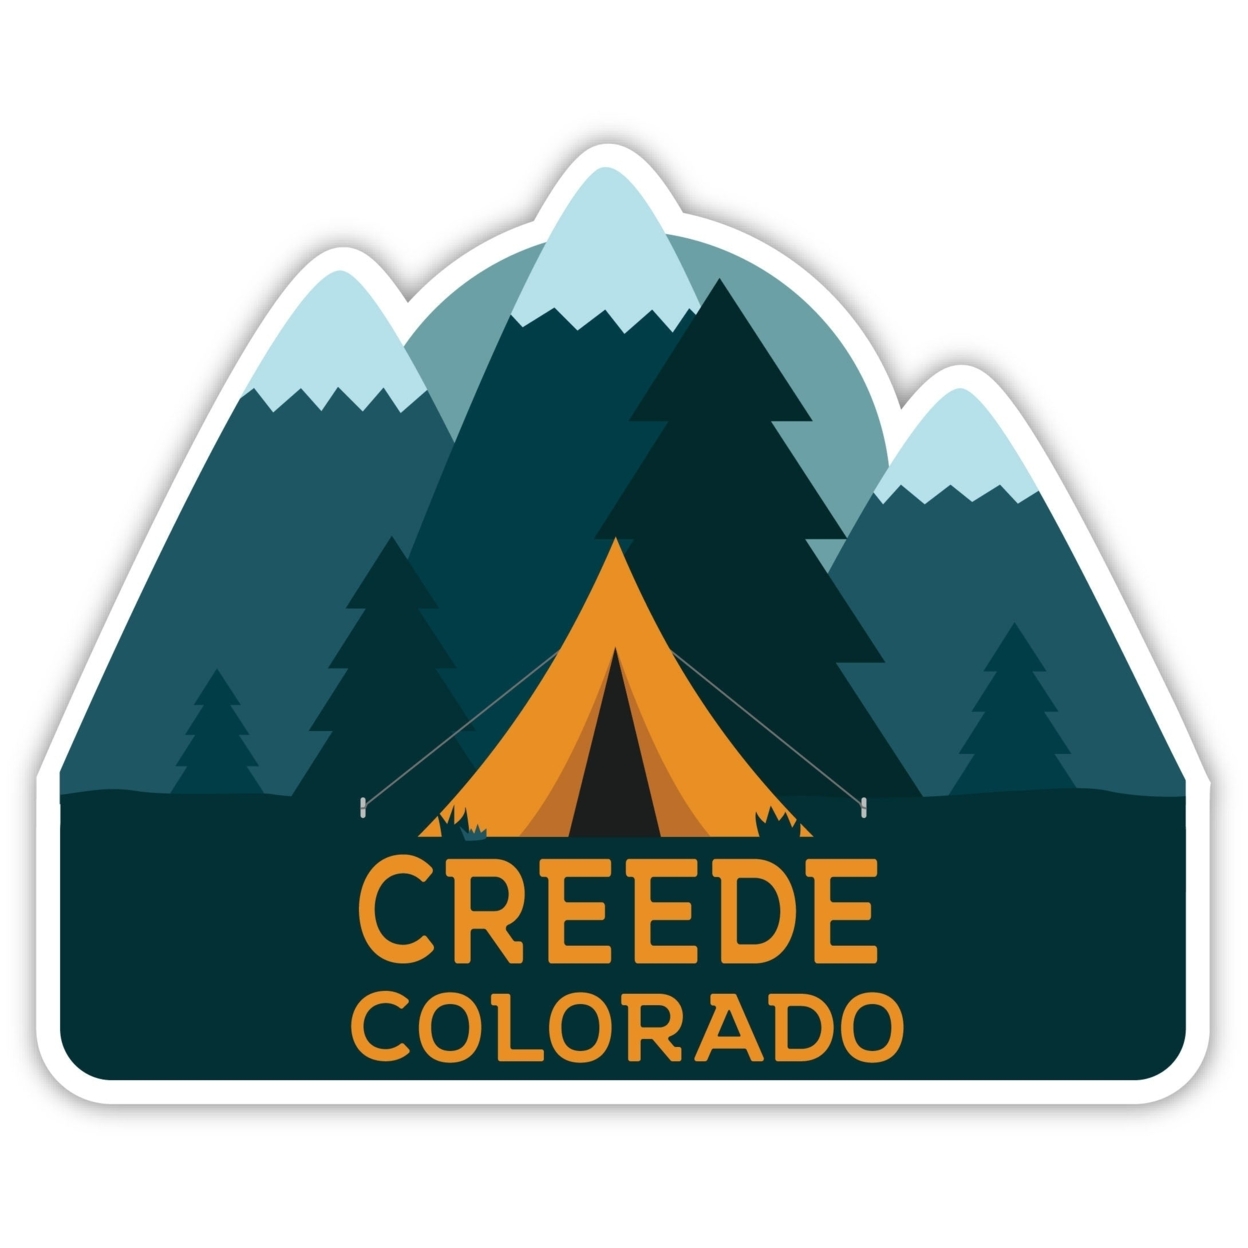 Creede Colorado Souvenir Decorative Stickers (Choose Theme And Size) - 4-Pack, 4-Inch, Tent